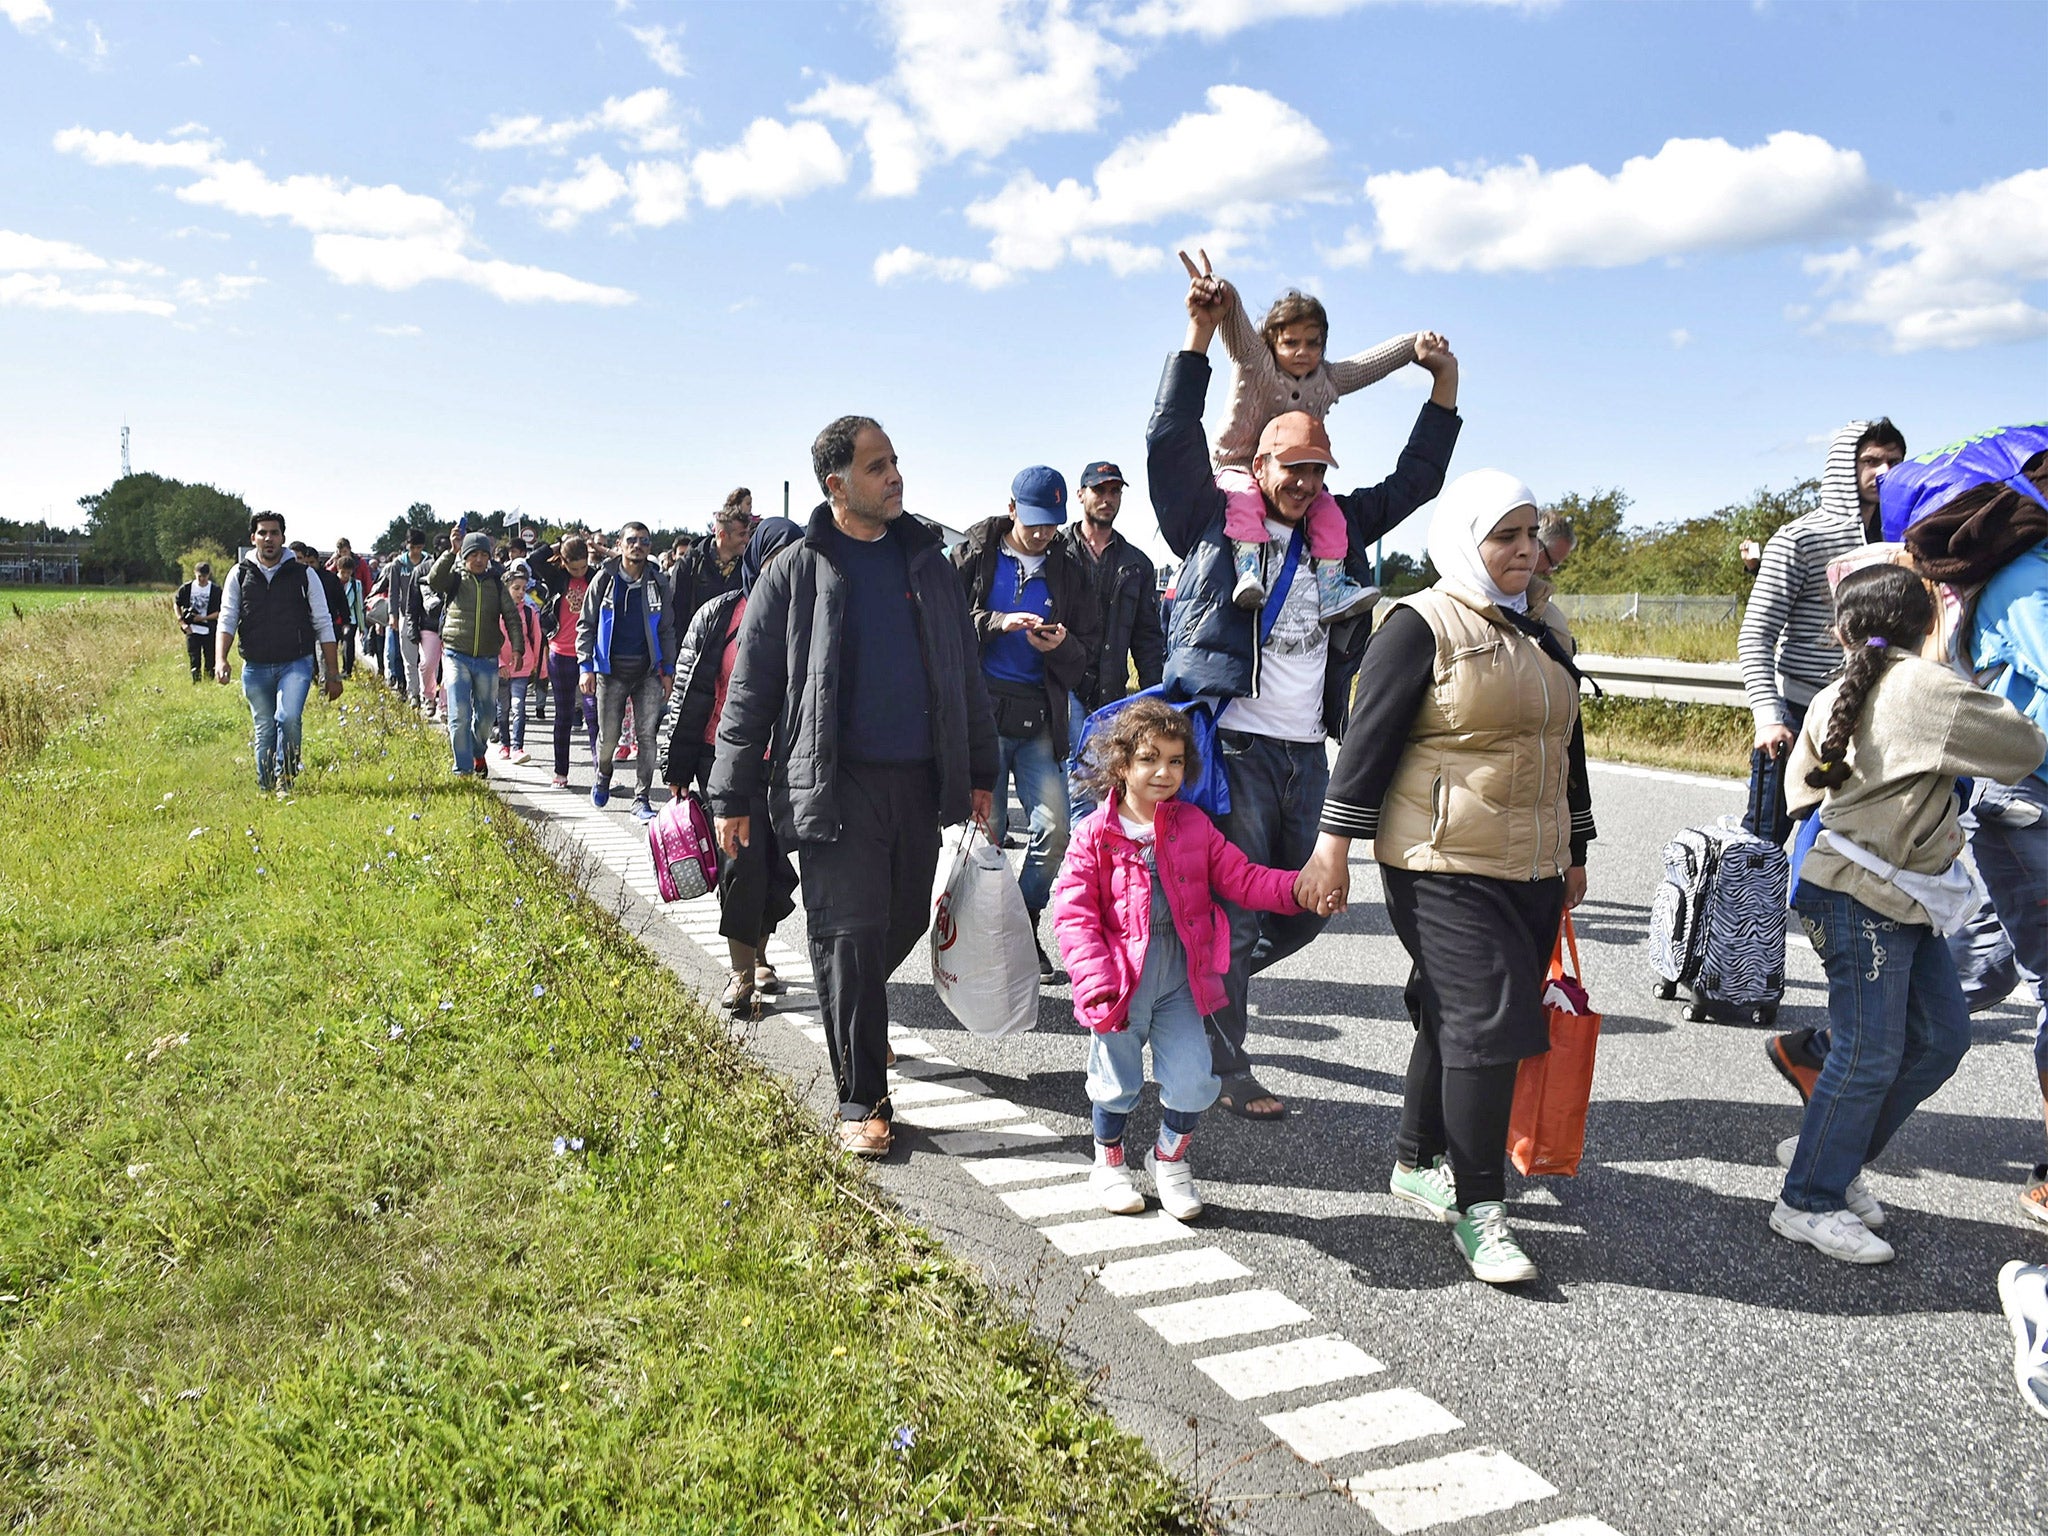 Refugee Crisis Sweden Introducing Border Checks To Bring Order To Country S Asylum System